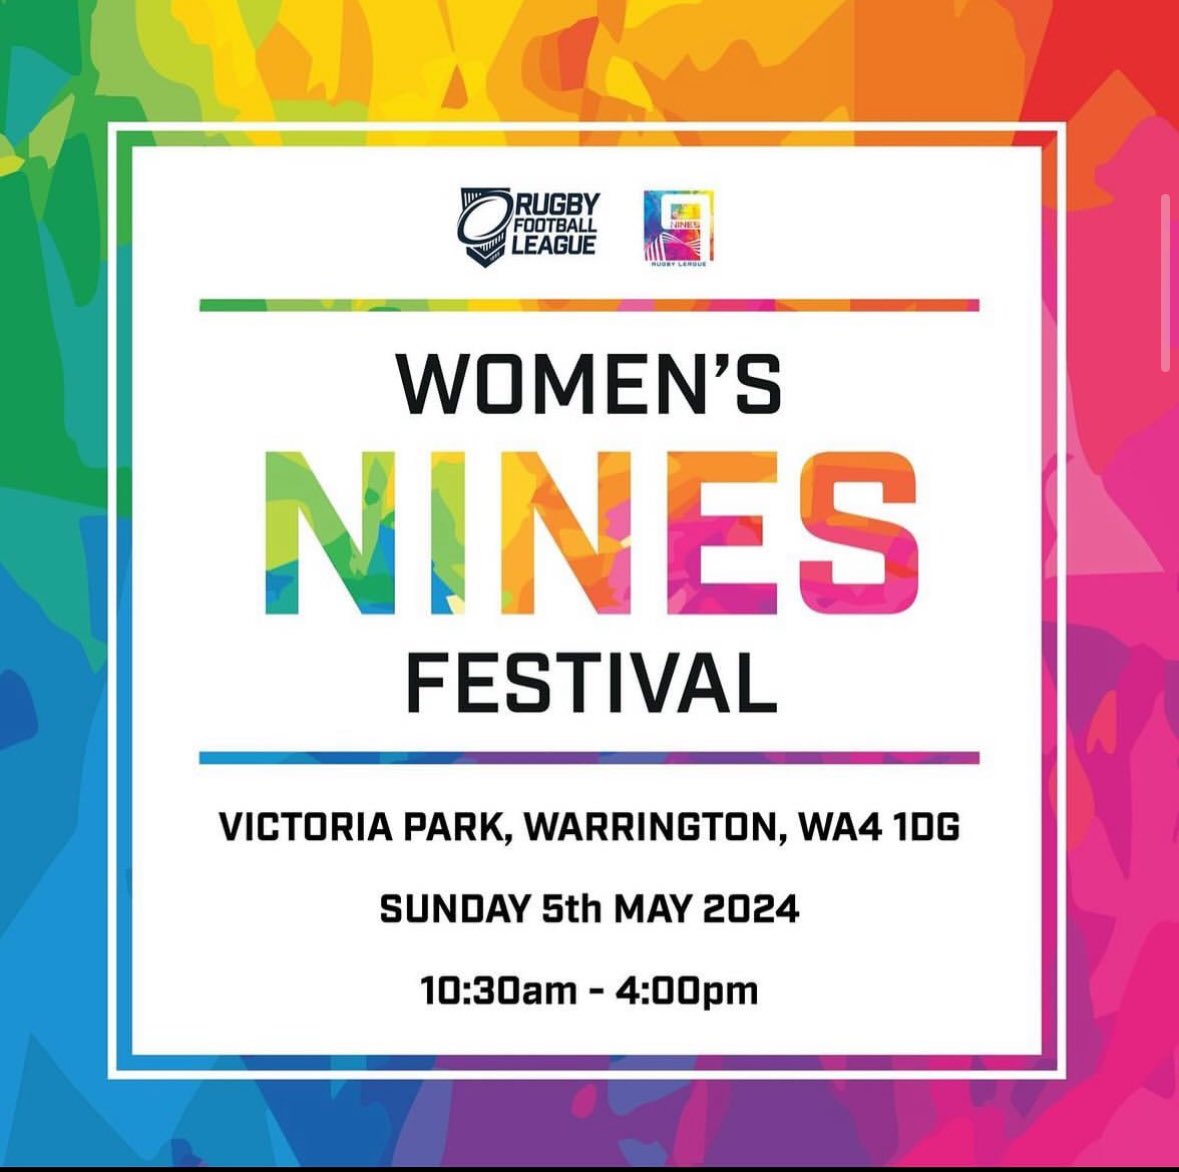 🏉Women's Nines Rugby League Returns at Victoria Park, Warrington, on Sunday, May 5th. 💪Last year, Leeds Rhinos triumphed, and this season promises exciting matches with all Super League teams and regional champions competing! 👏Entry on the day is FREE, see you there!